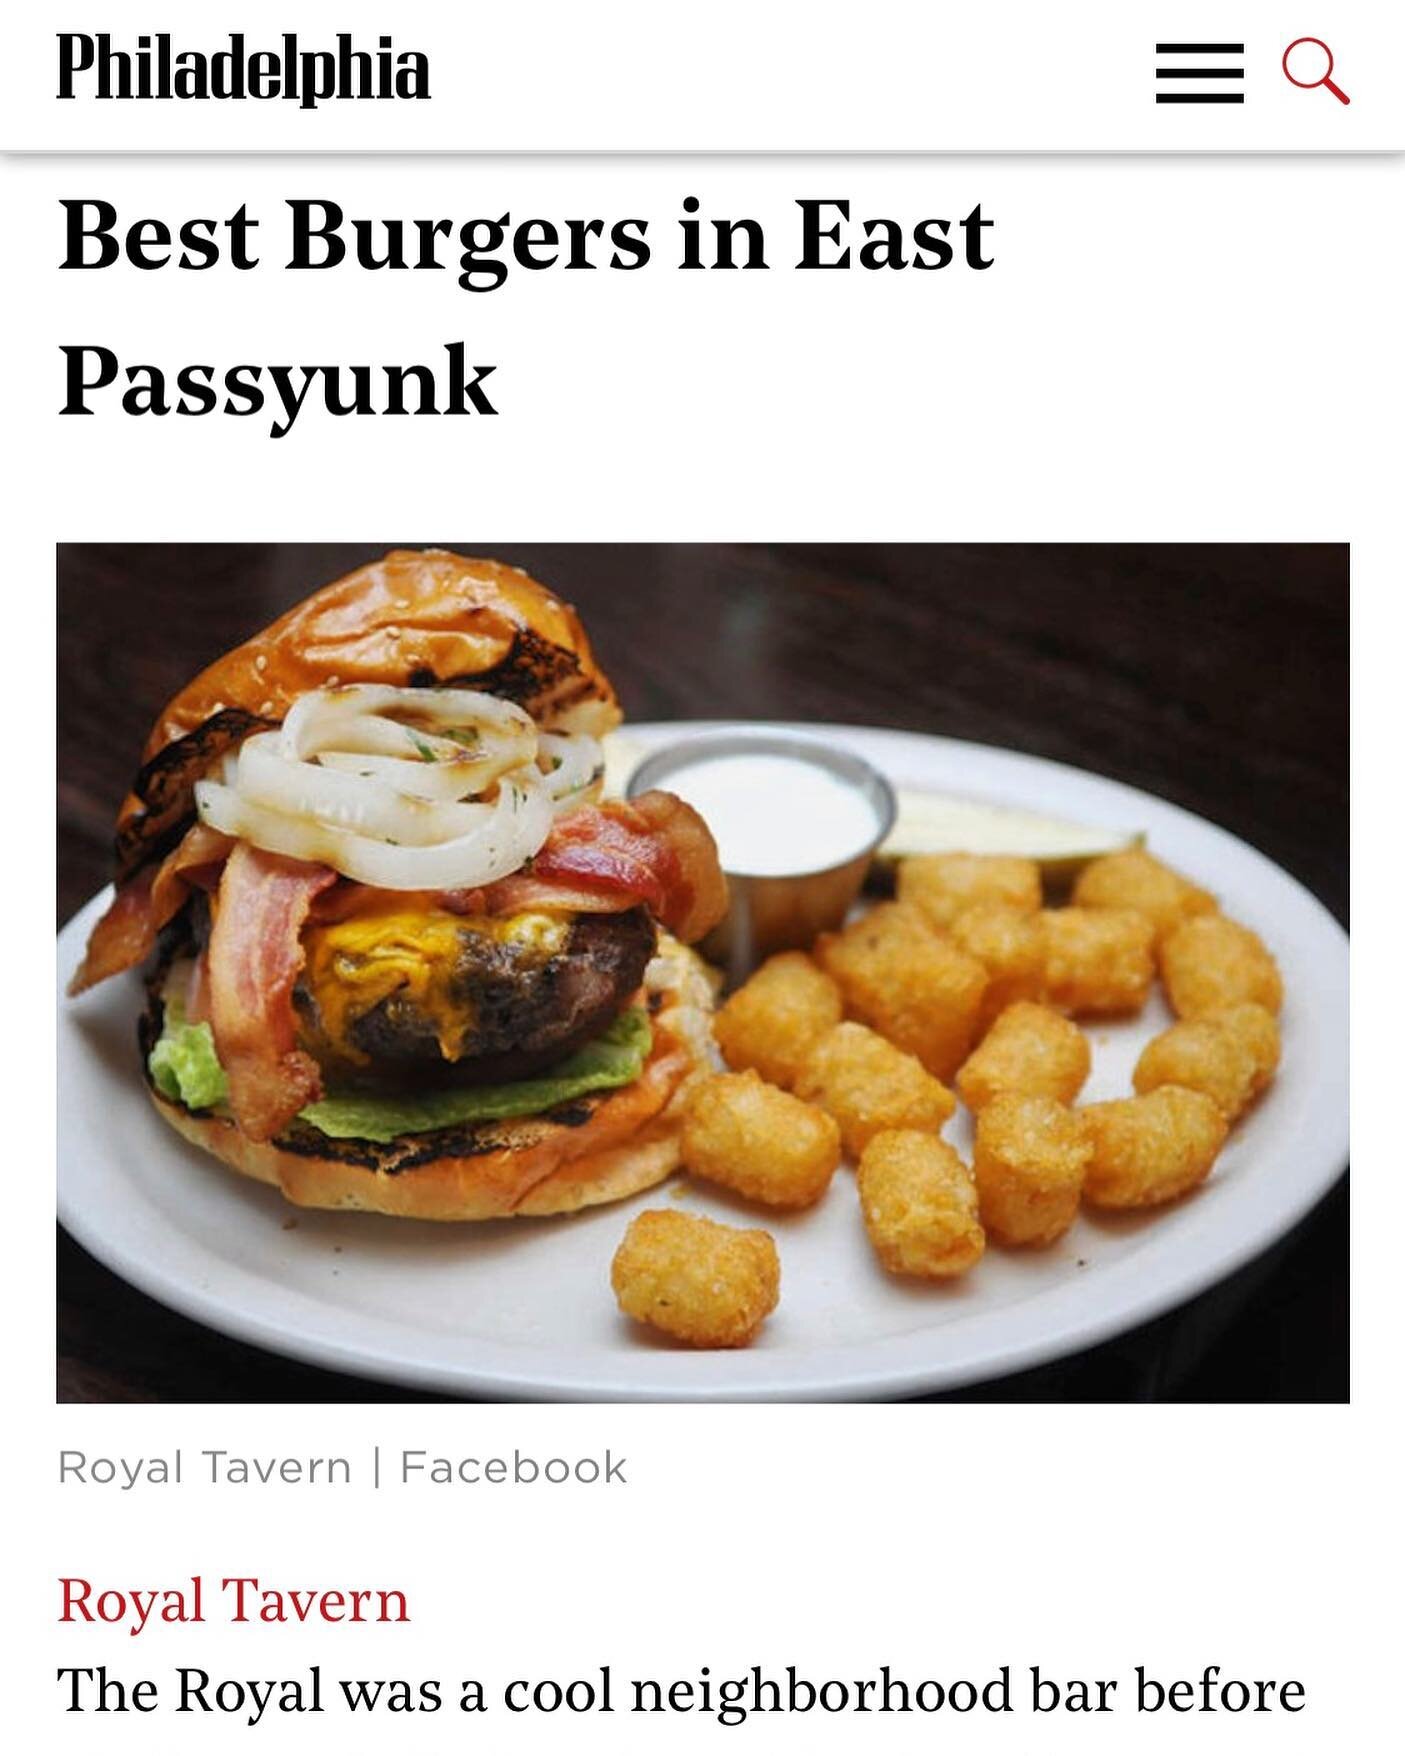 Thanks for the love, @phillymag! Grab one (or a few!) of our famous burgers this weekend! #royaltavern #burgersandbeer #eastpassyunk #queenvillage